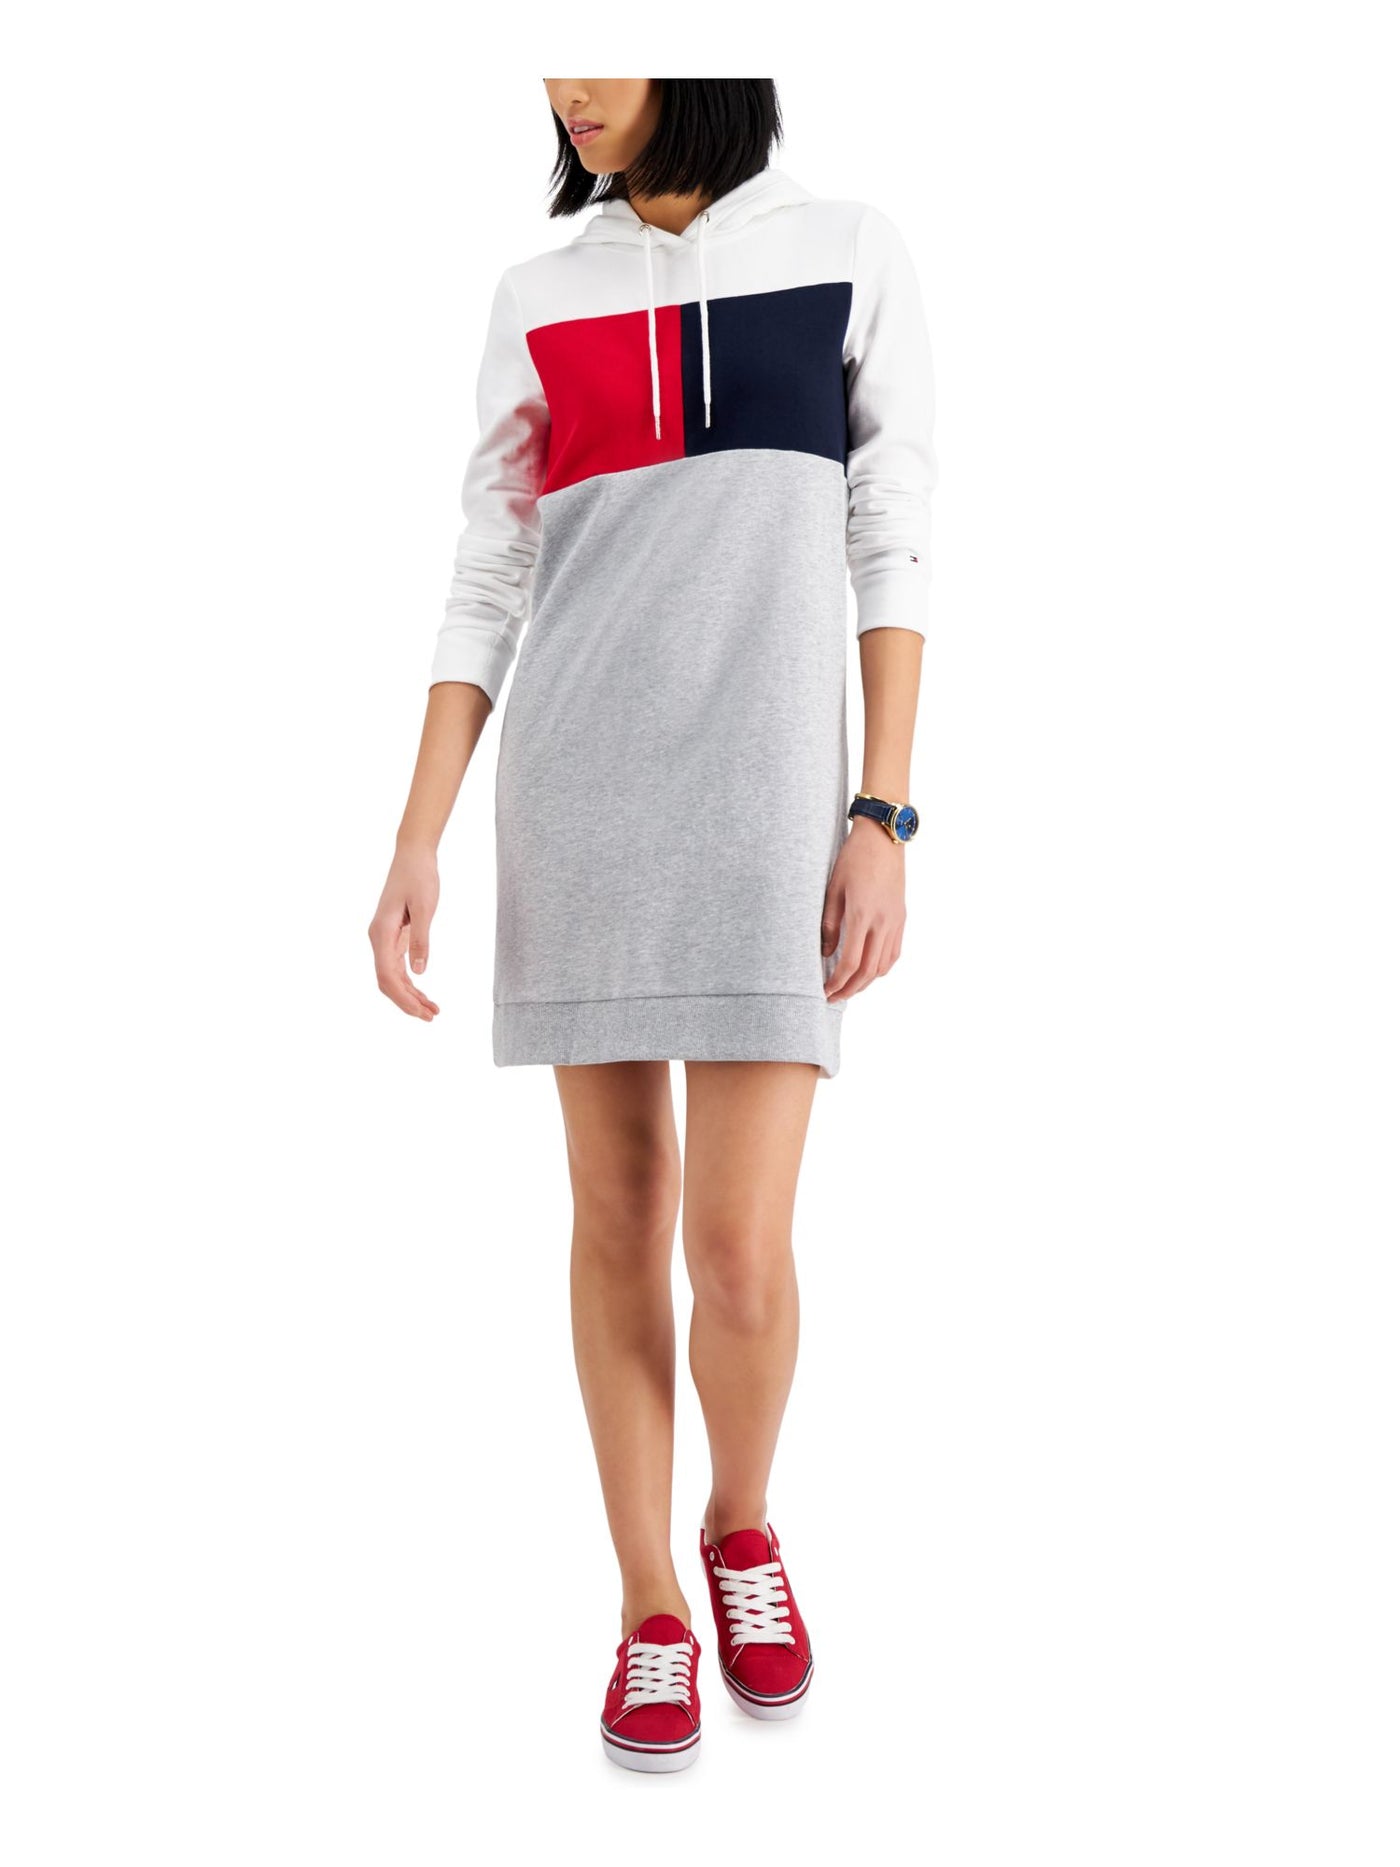 TOMMY HILFIGER Womens White Cotton Blend Ribbed Drawstring Hooded Sweatshirt Color Block Long Sleeve Above The Knee Dress XS